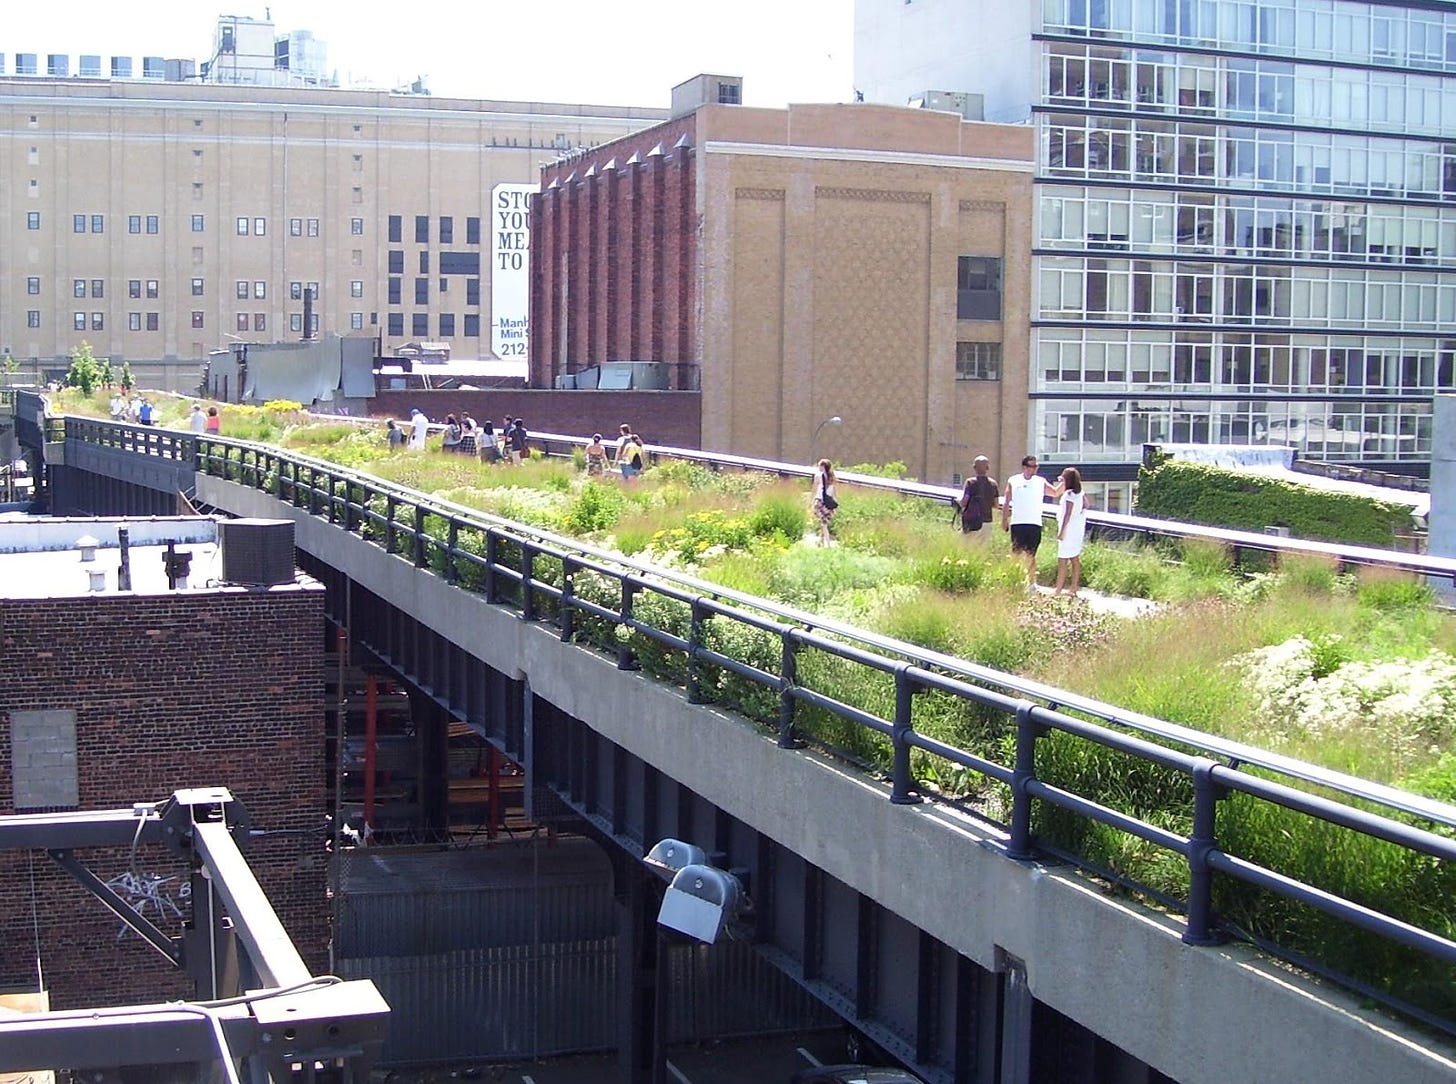 The High Line, New York City (20th Street, looking downtown). Credit: (cc) Beyond My Ken.